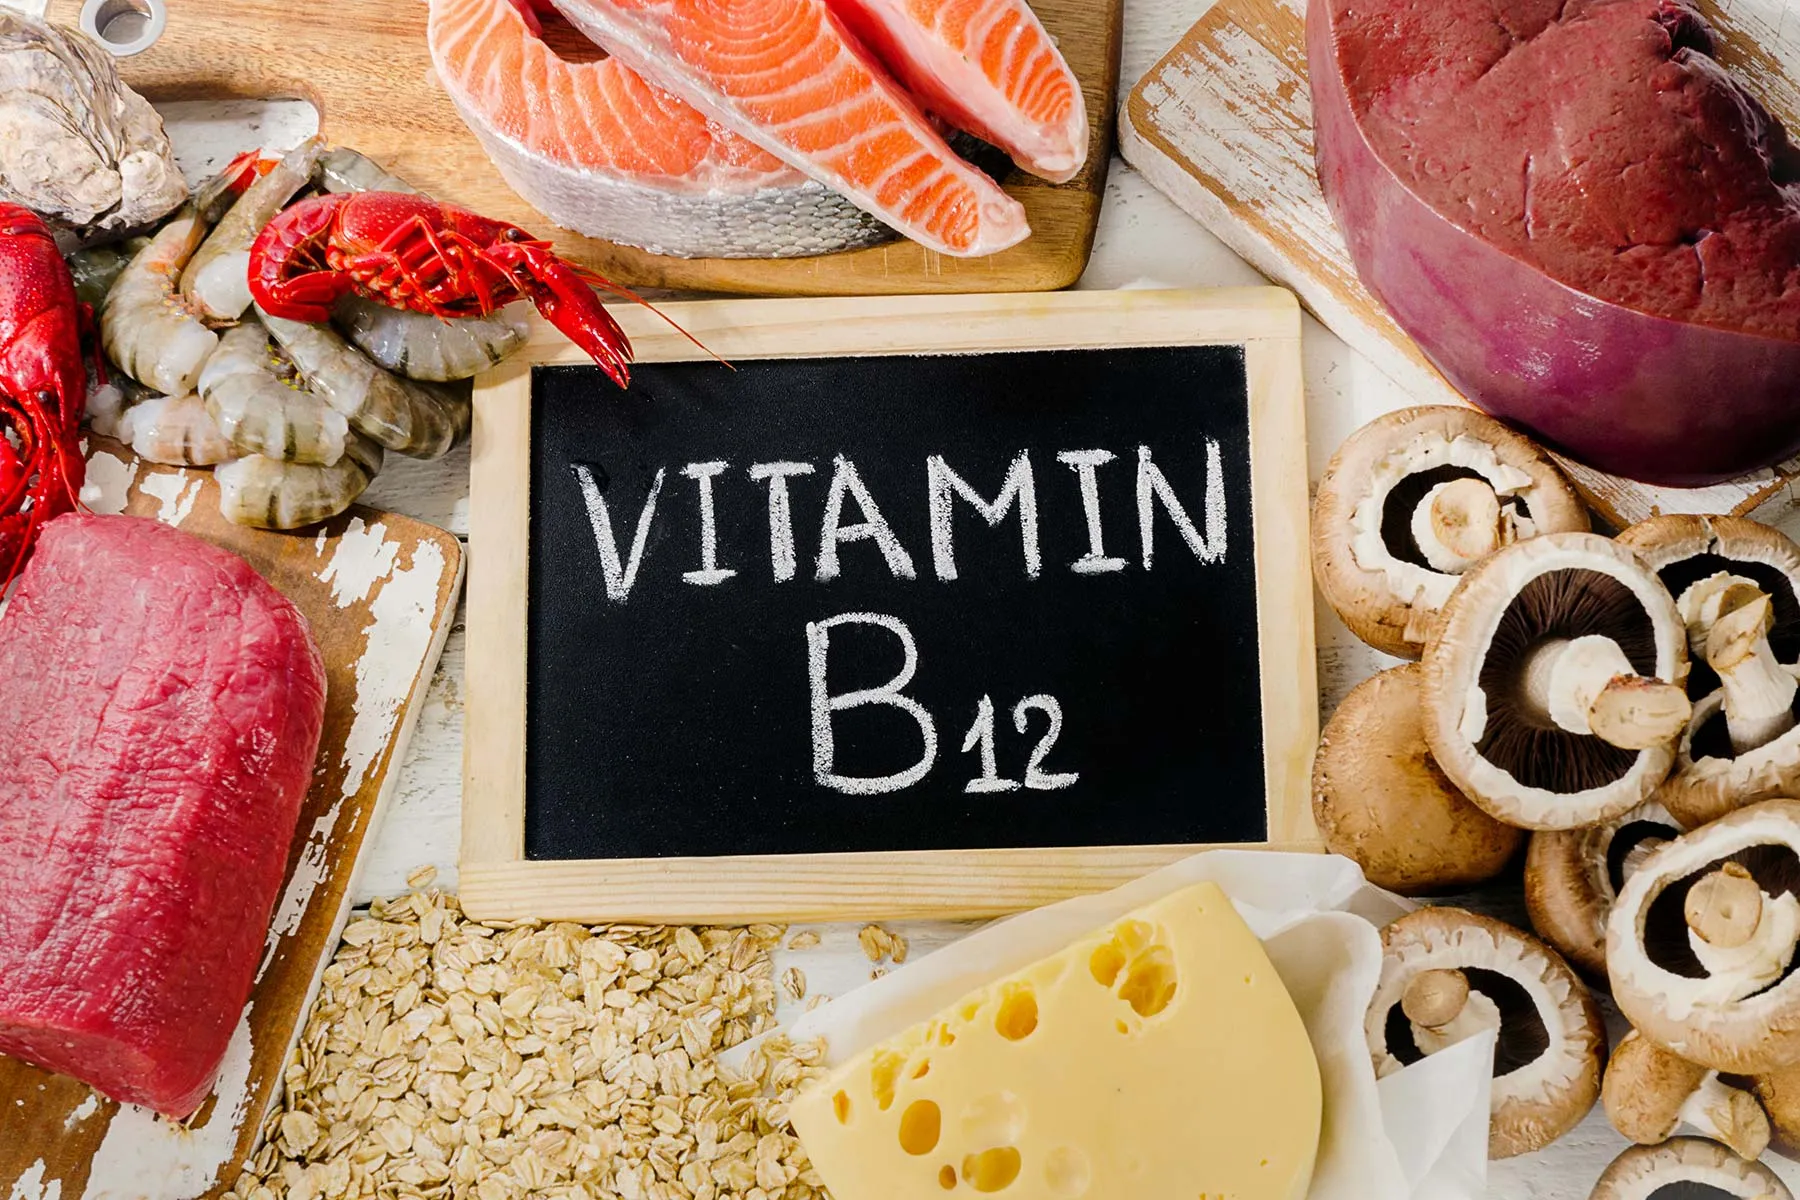 Vitamin B12 deficiency: causes, symptoms, and treatment